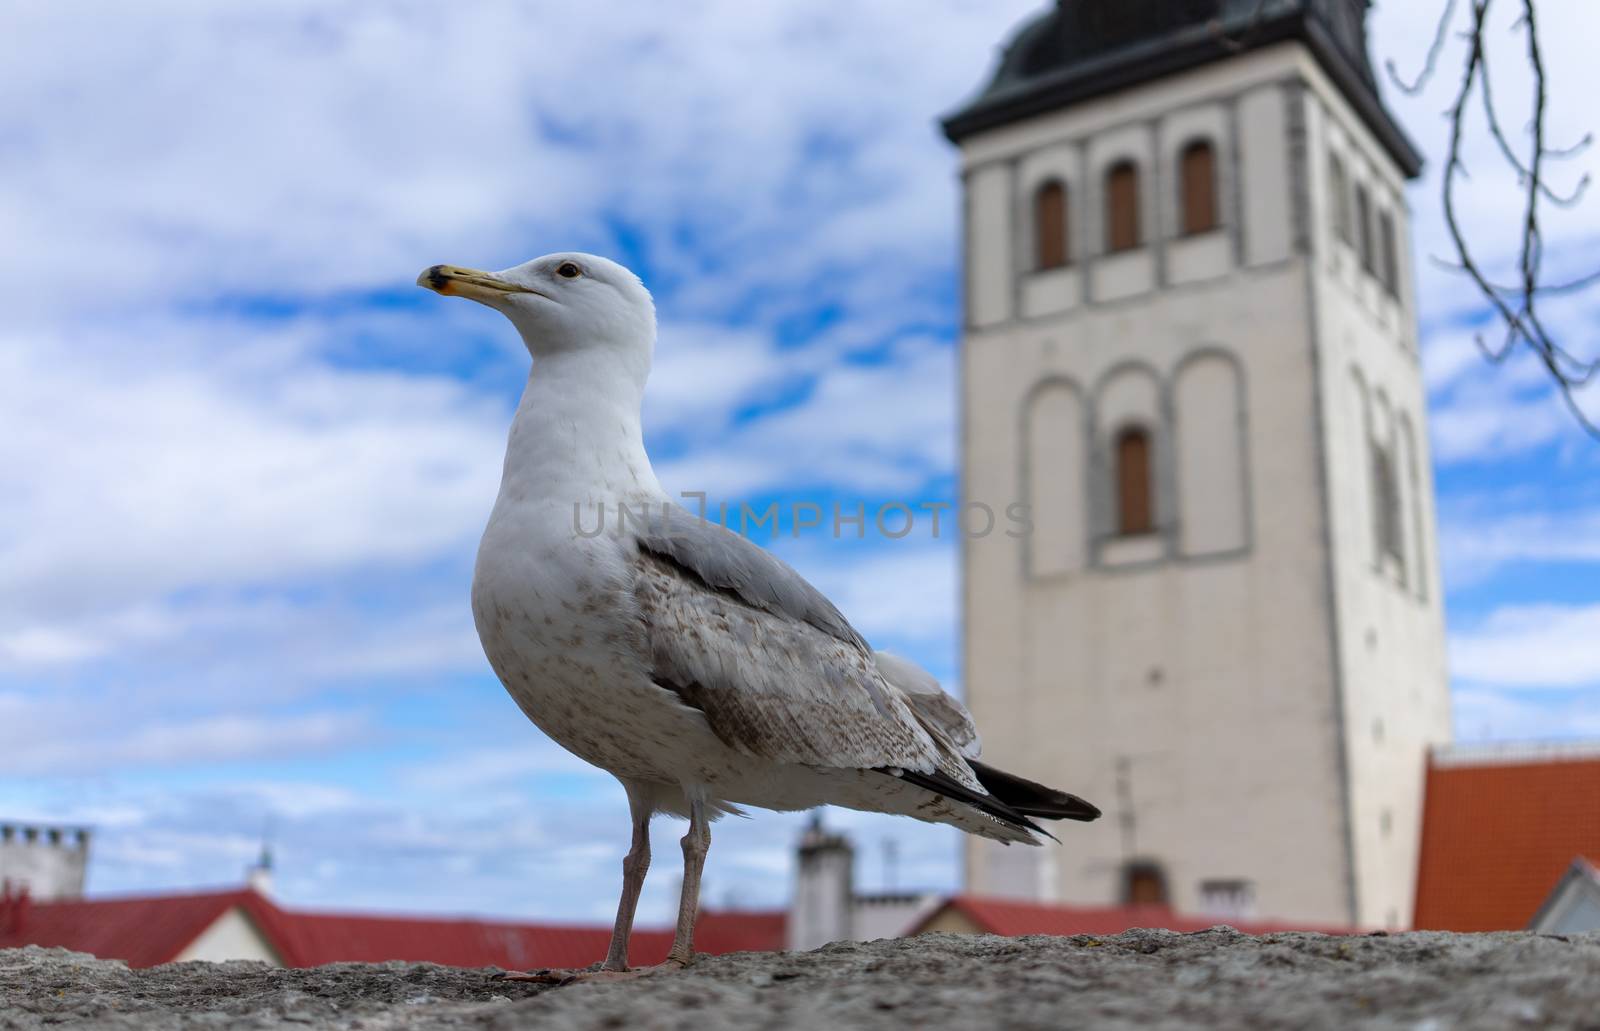 Seagull on a concrete slab on the background of the Old town in Tallinn